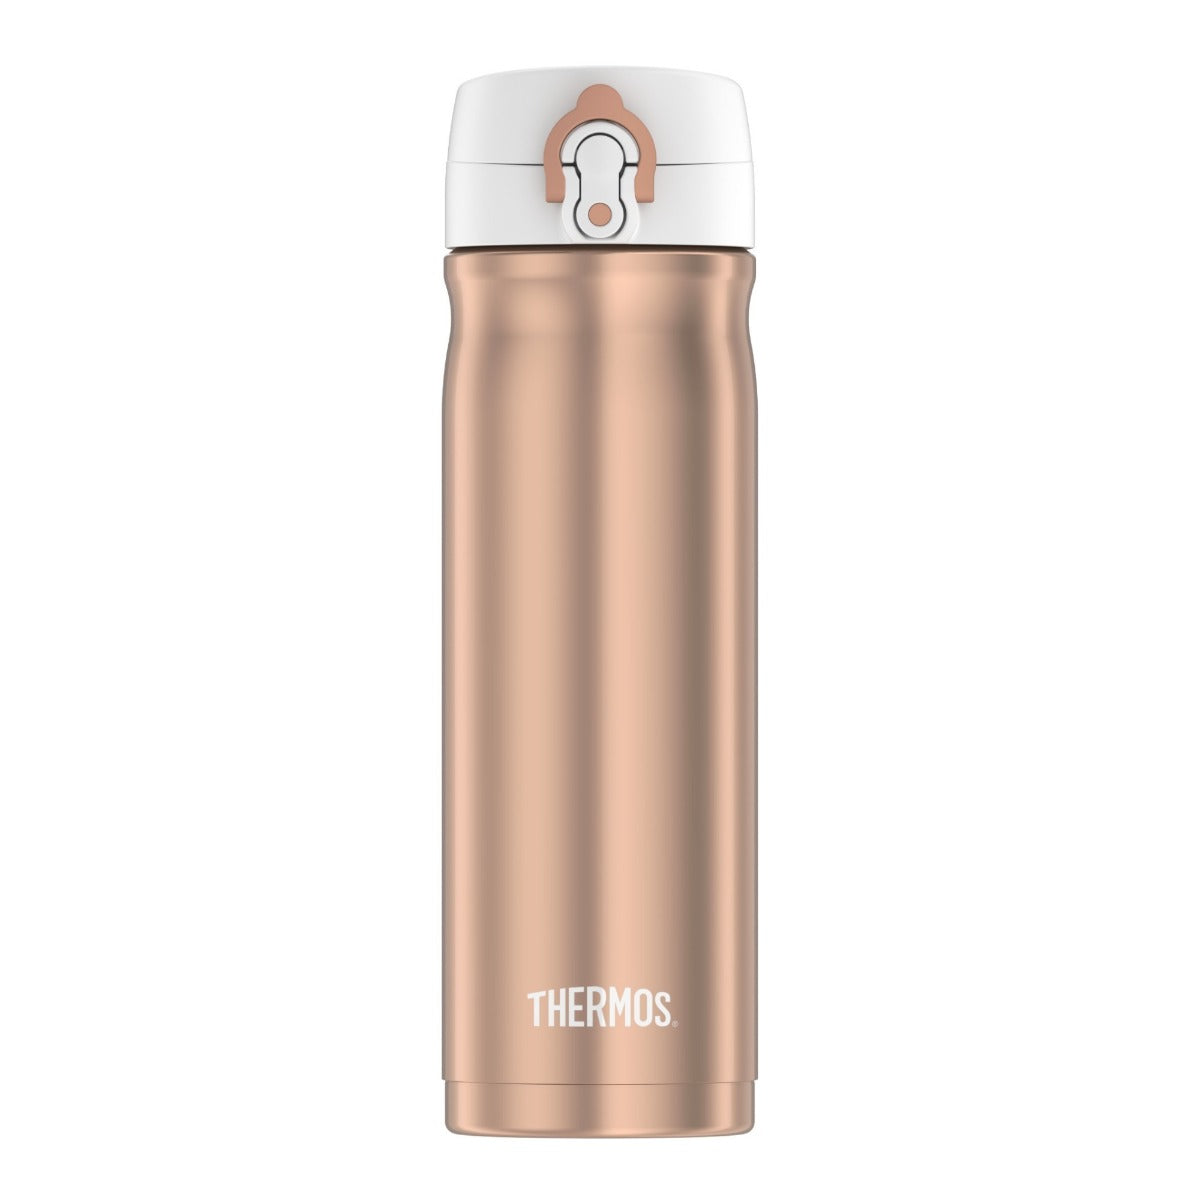 Thermos Direct Drink Bottle 16oz | Acton Coffee House